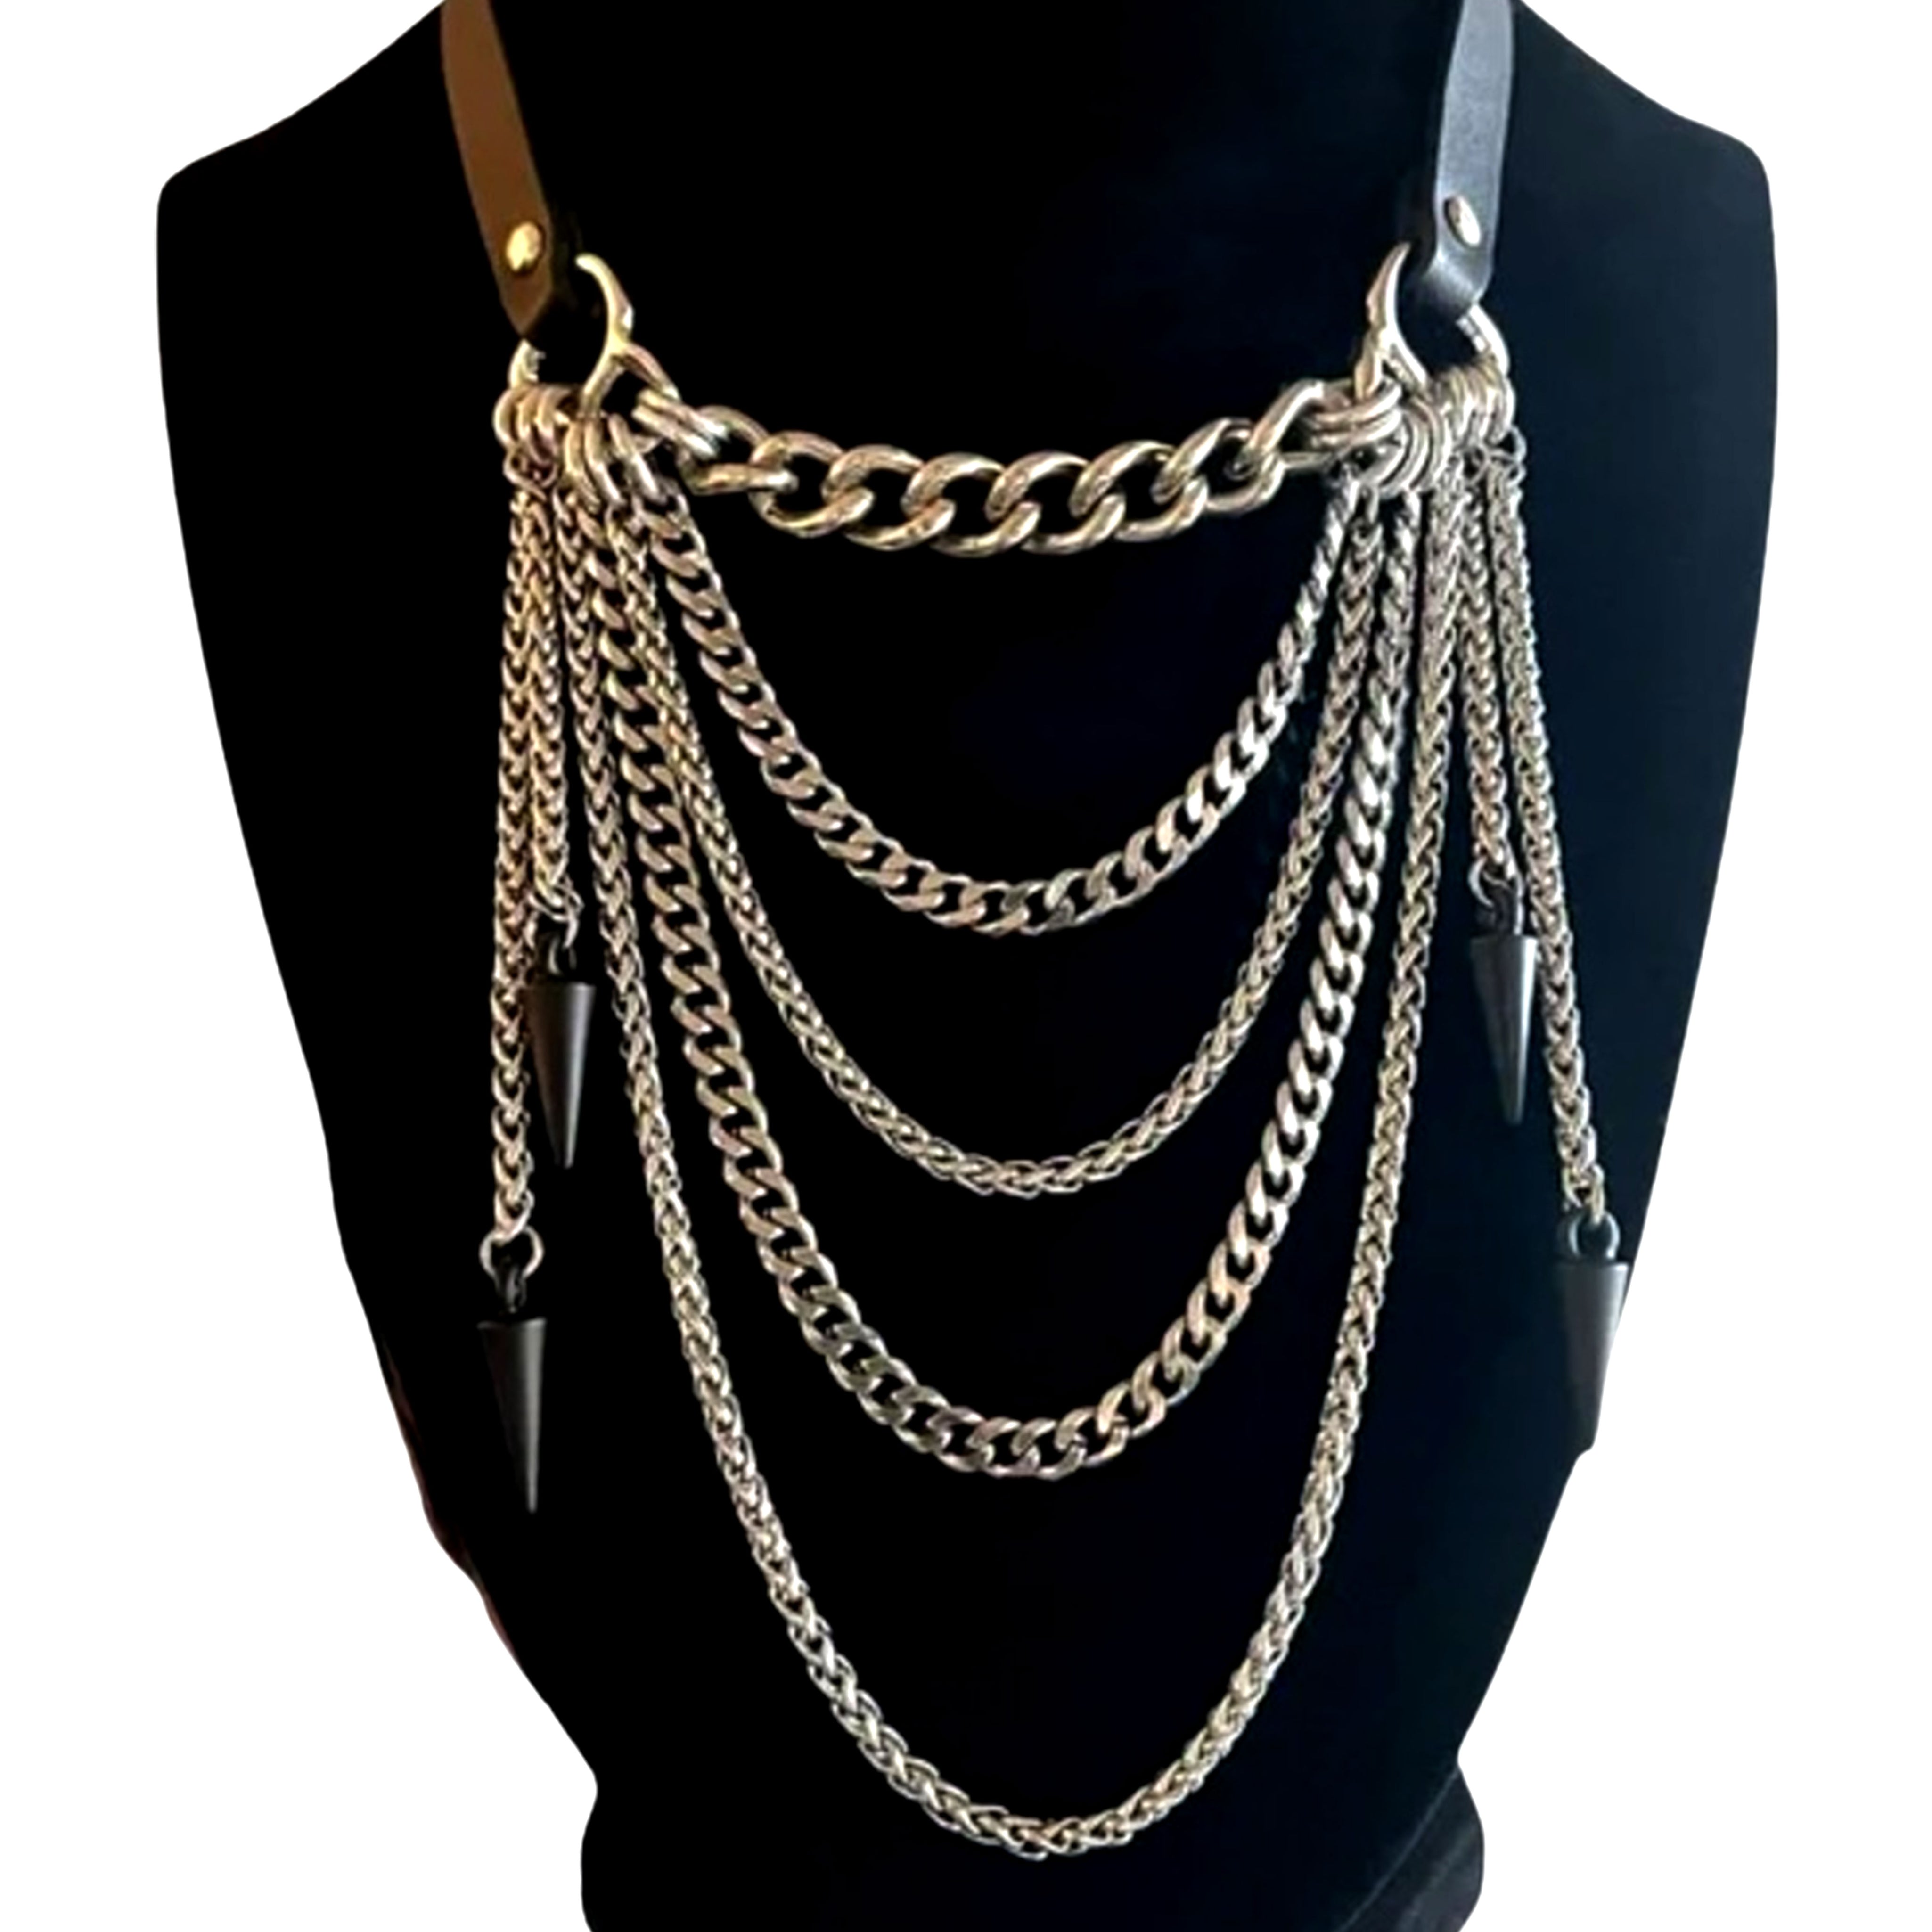 Multi Hanging Chains & Spikes Leather Choker